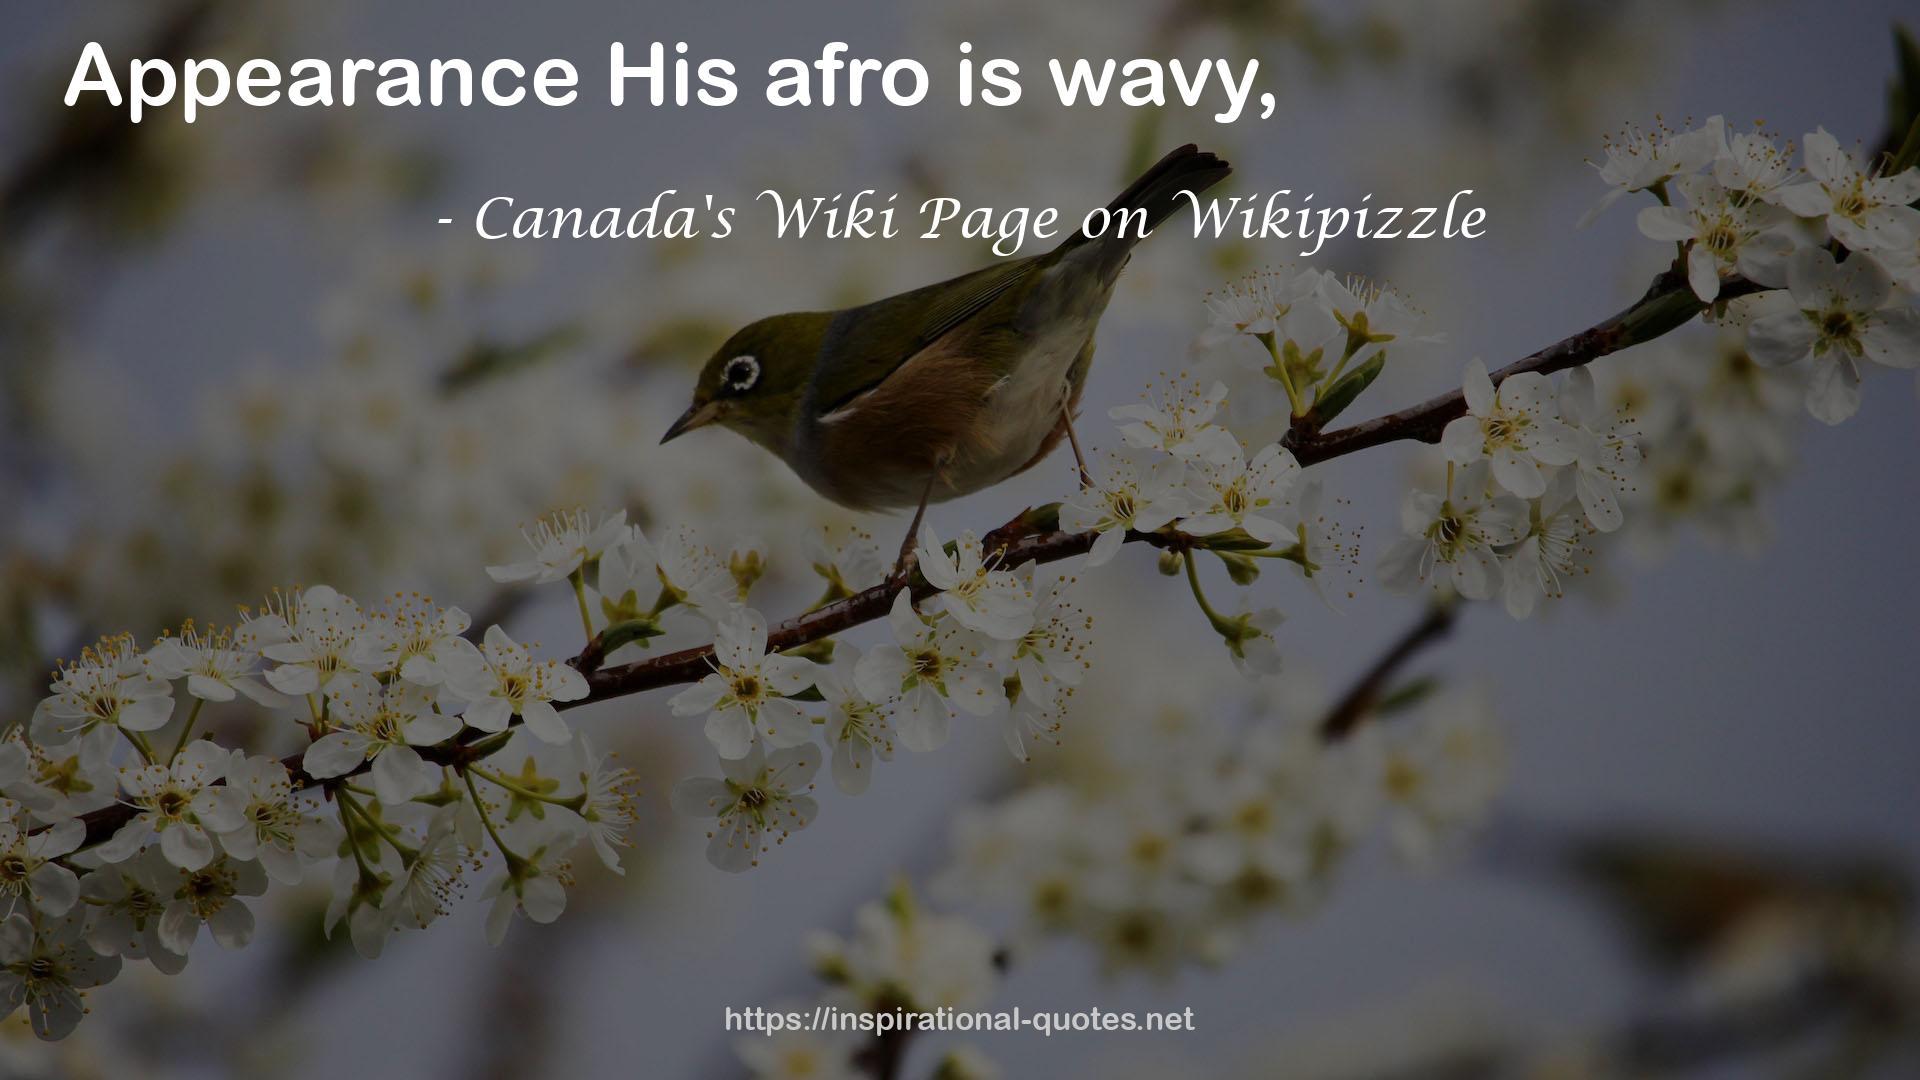 Canada's Wiki Page on Wikipizzle QUOTES